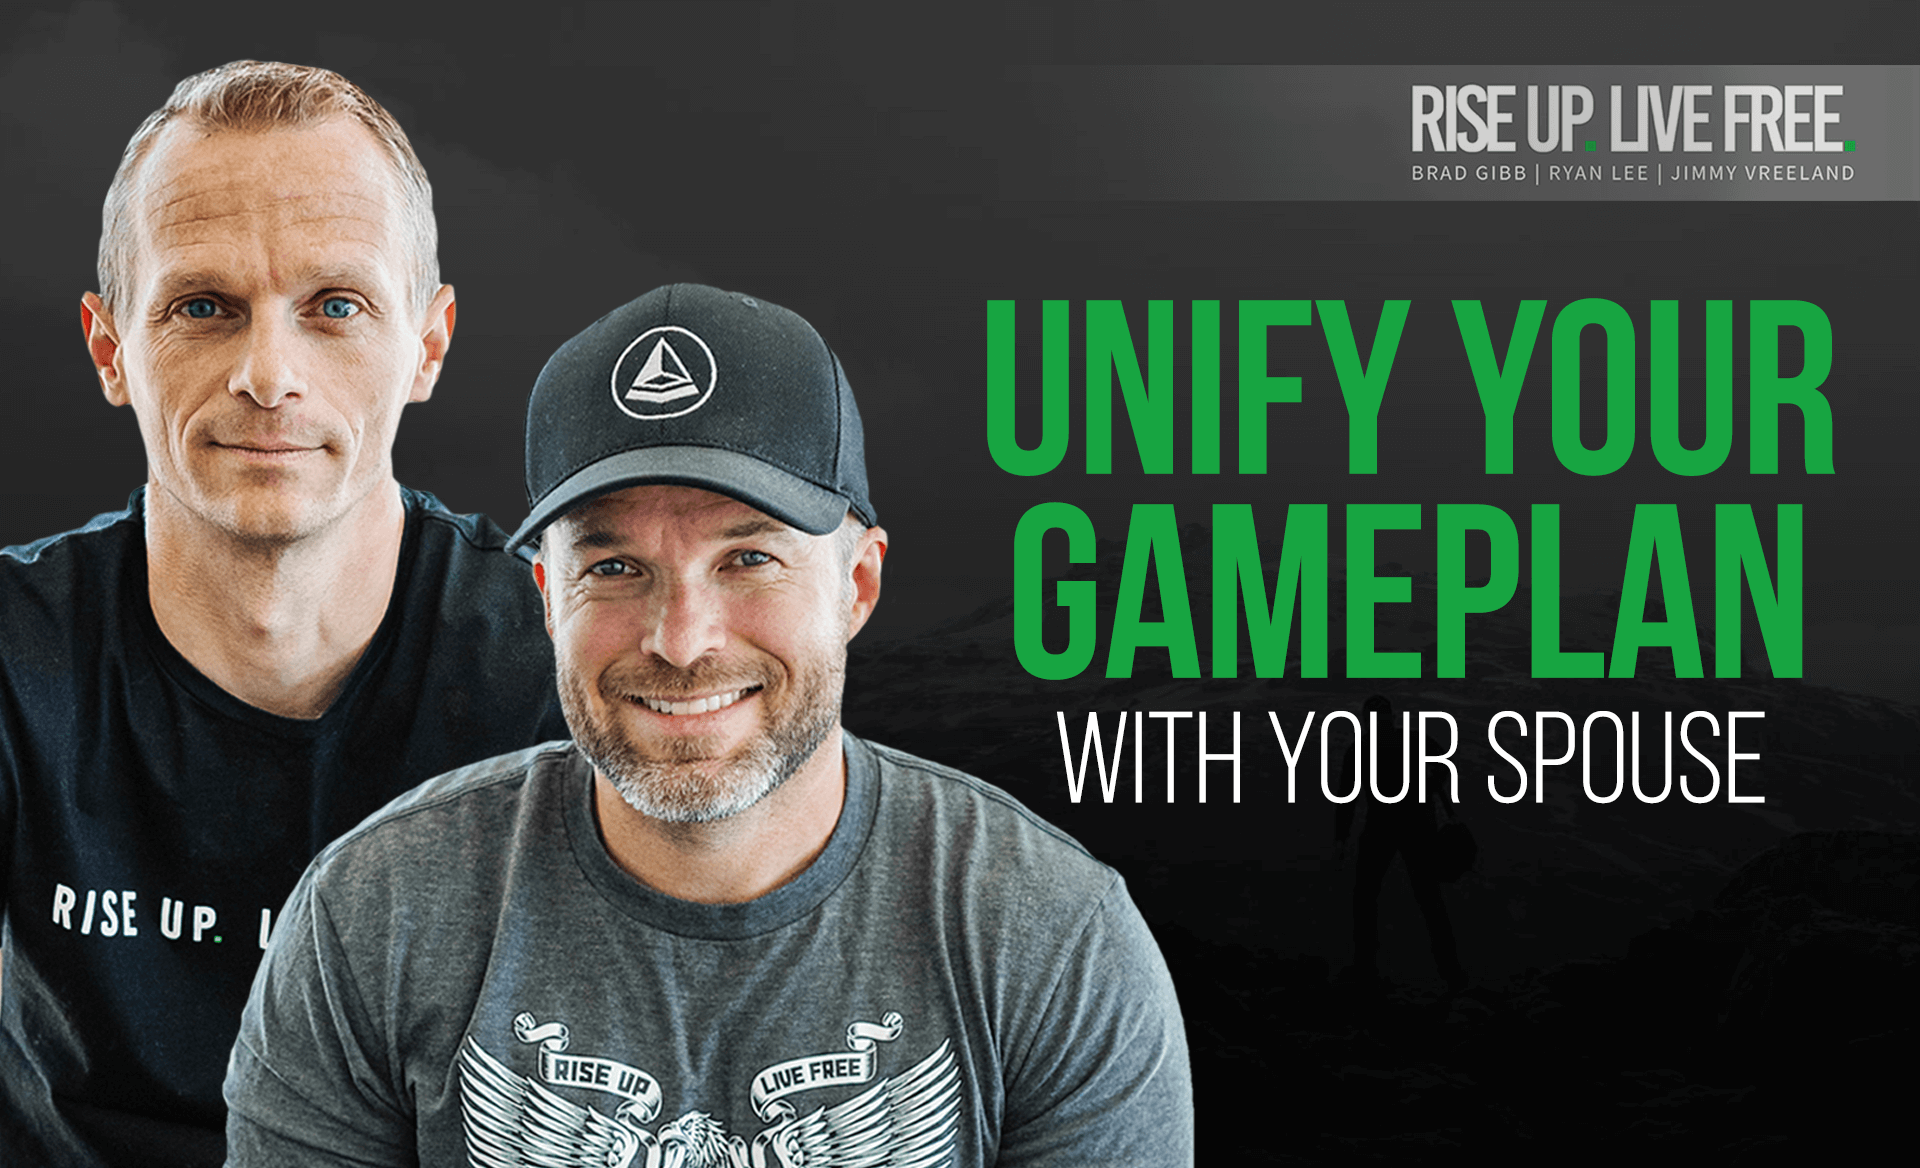 Unify your gameplan with your spouse